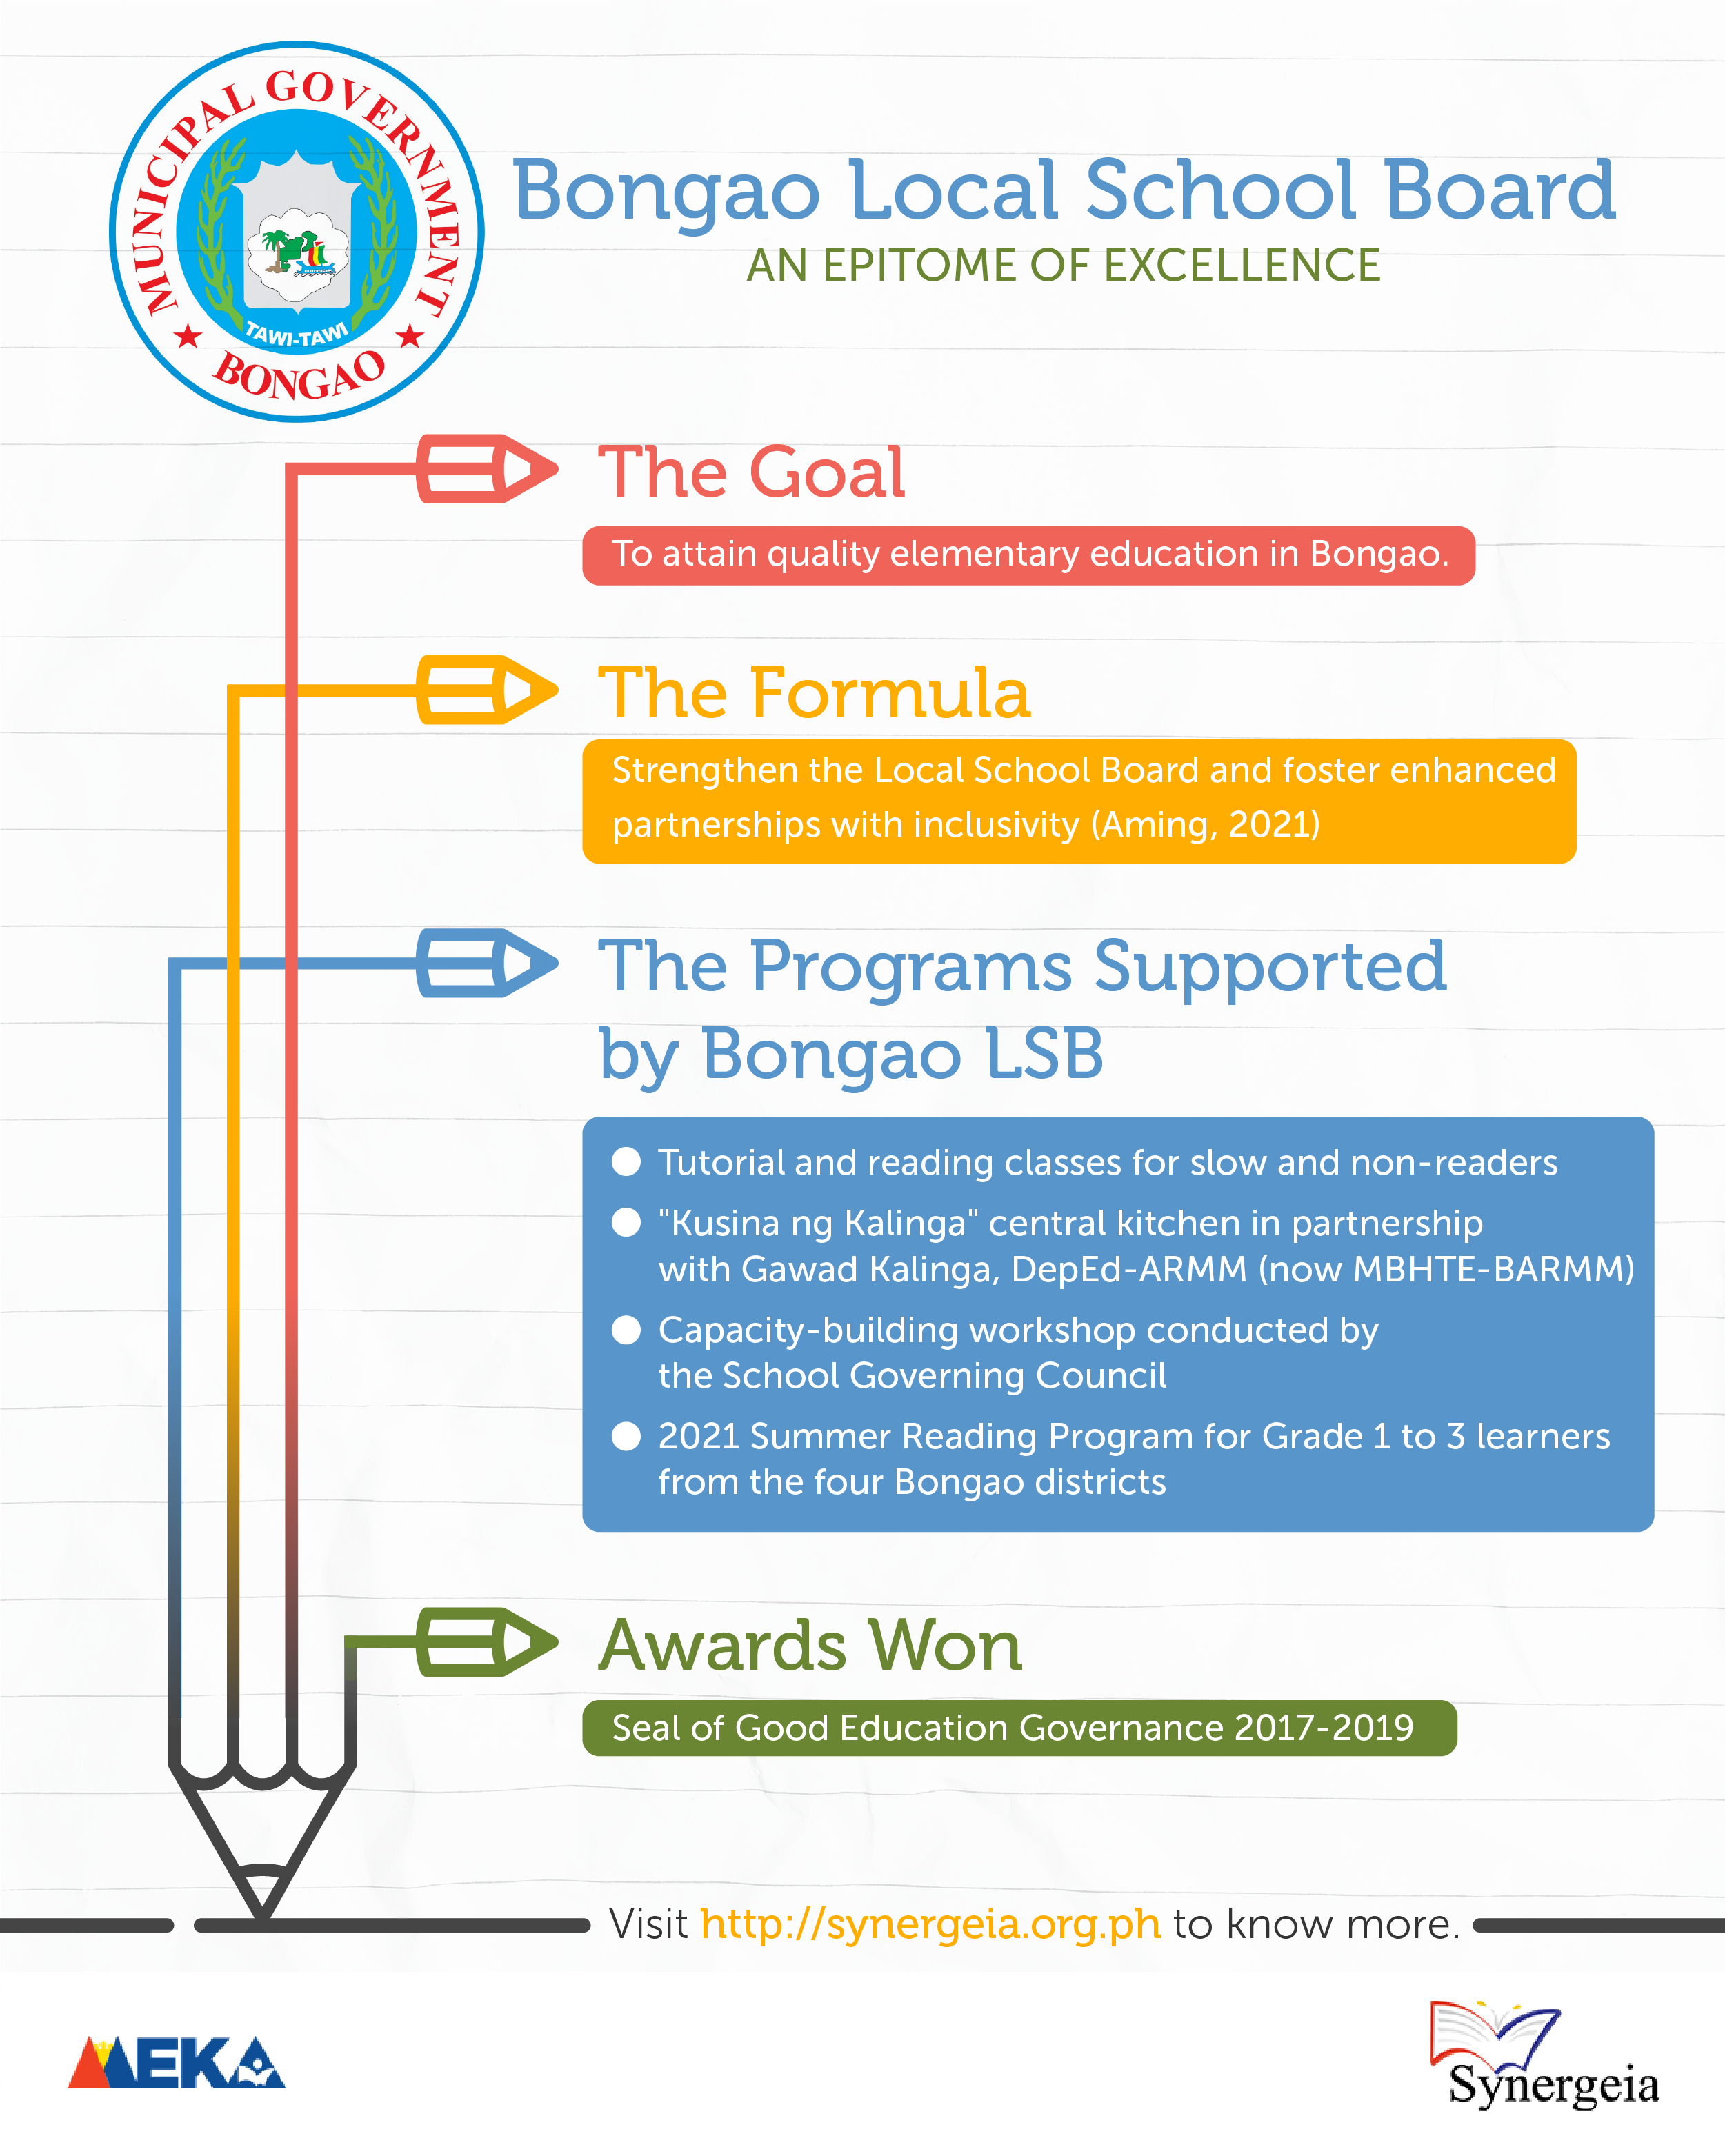 BONGAO LOCAL SCHOOL BOARD – AN EPITOME OF EXCELLENCE